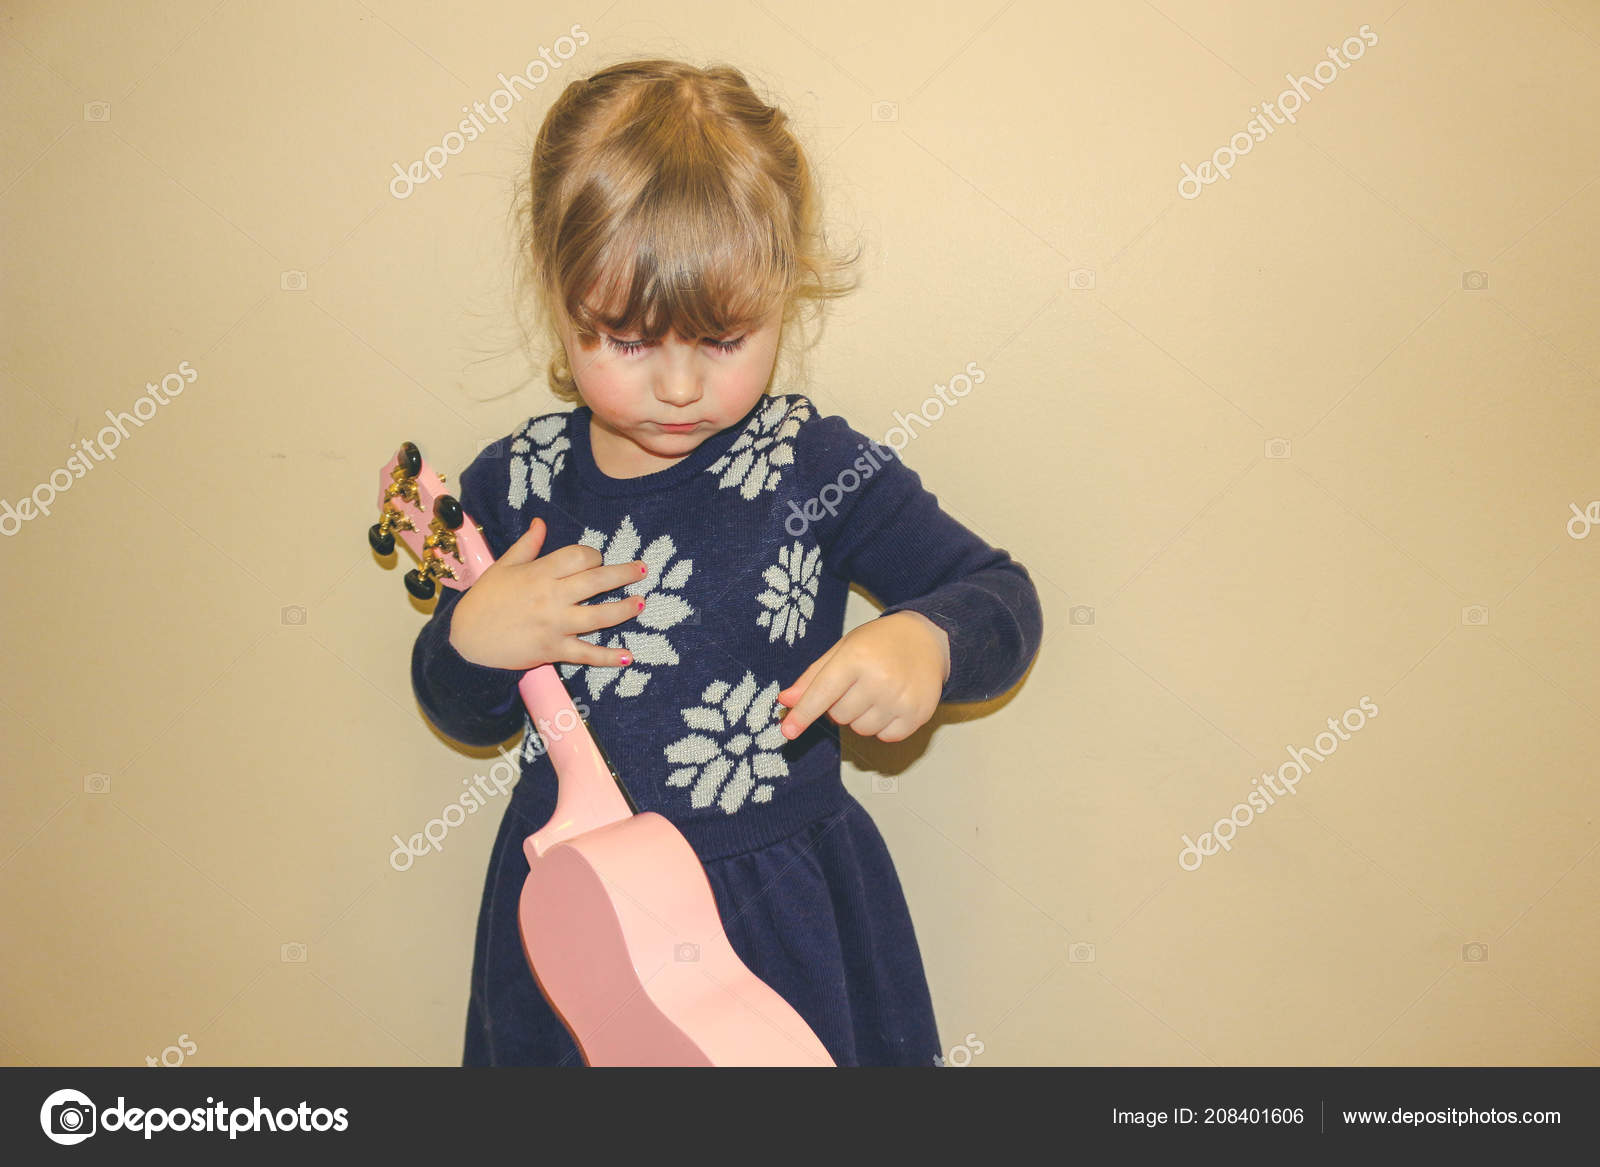 Young Girl Aged 3 To 5 Years Old Holding A Ukelele And Learning